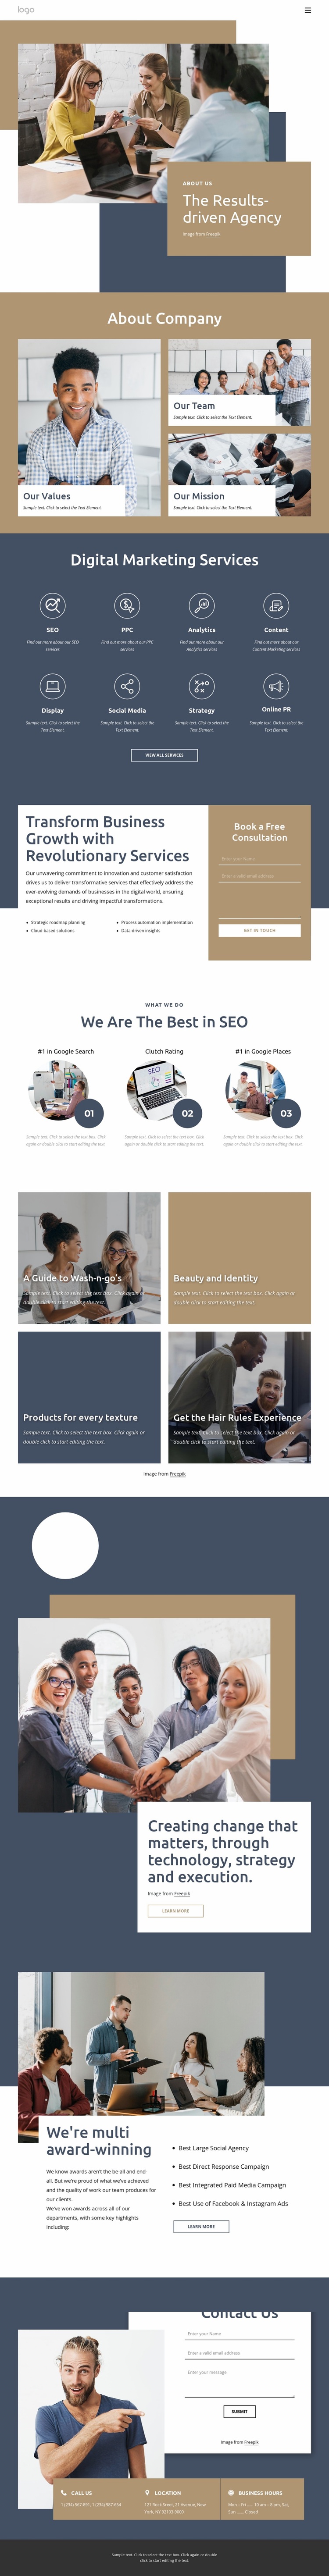 The results-driven agency Website Design